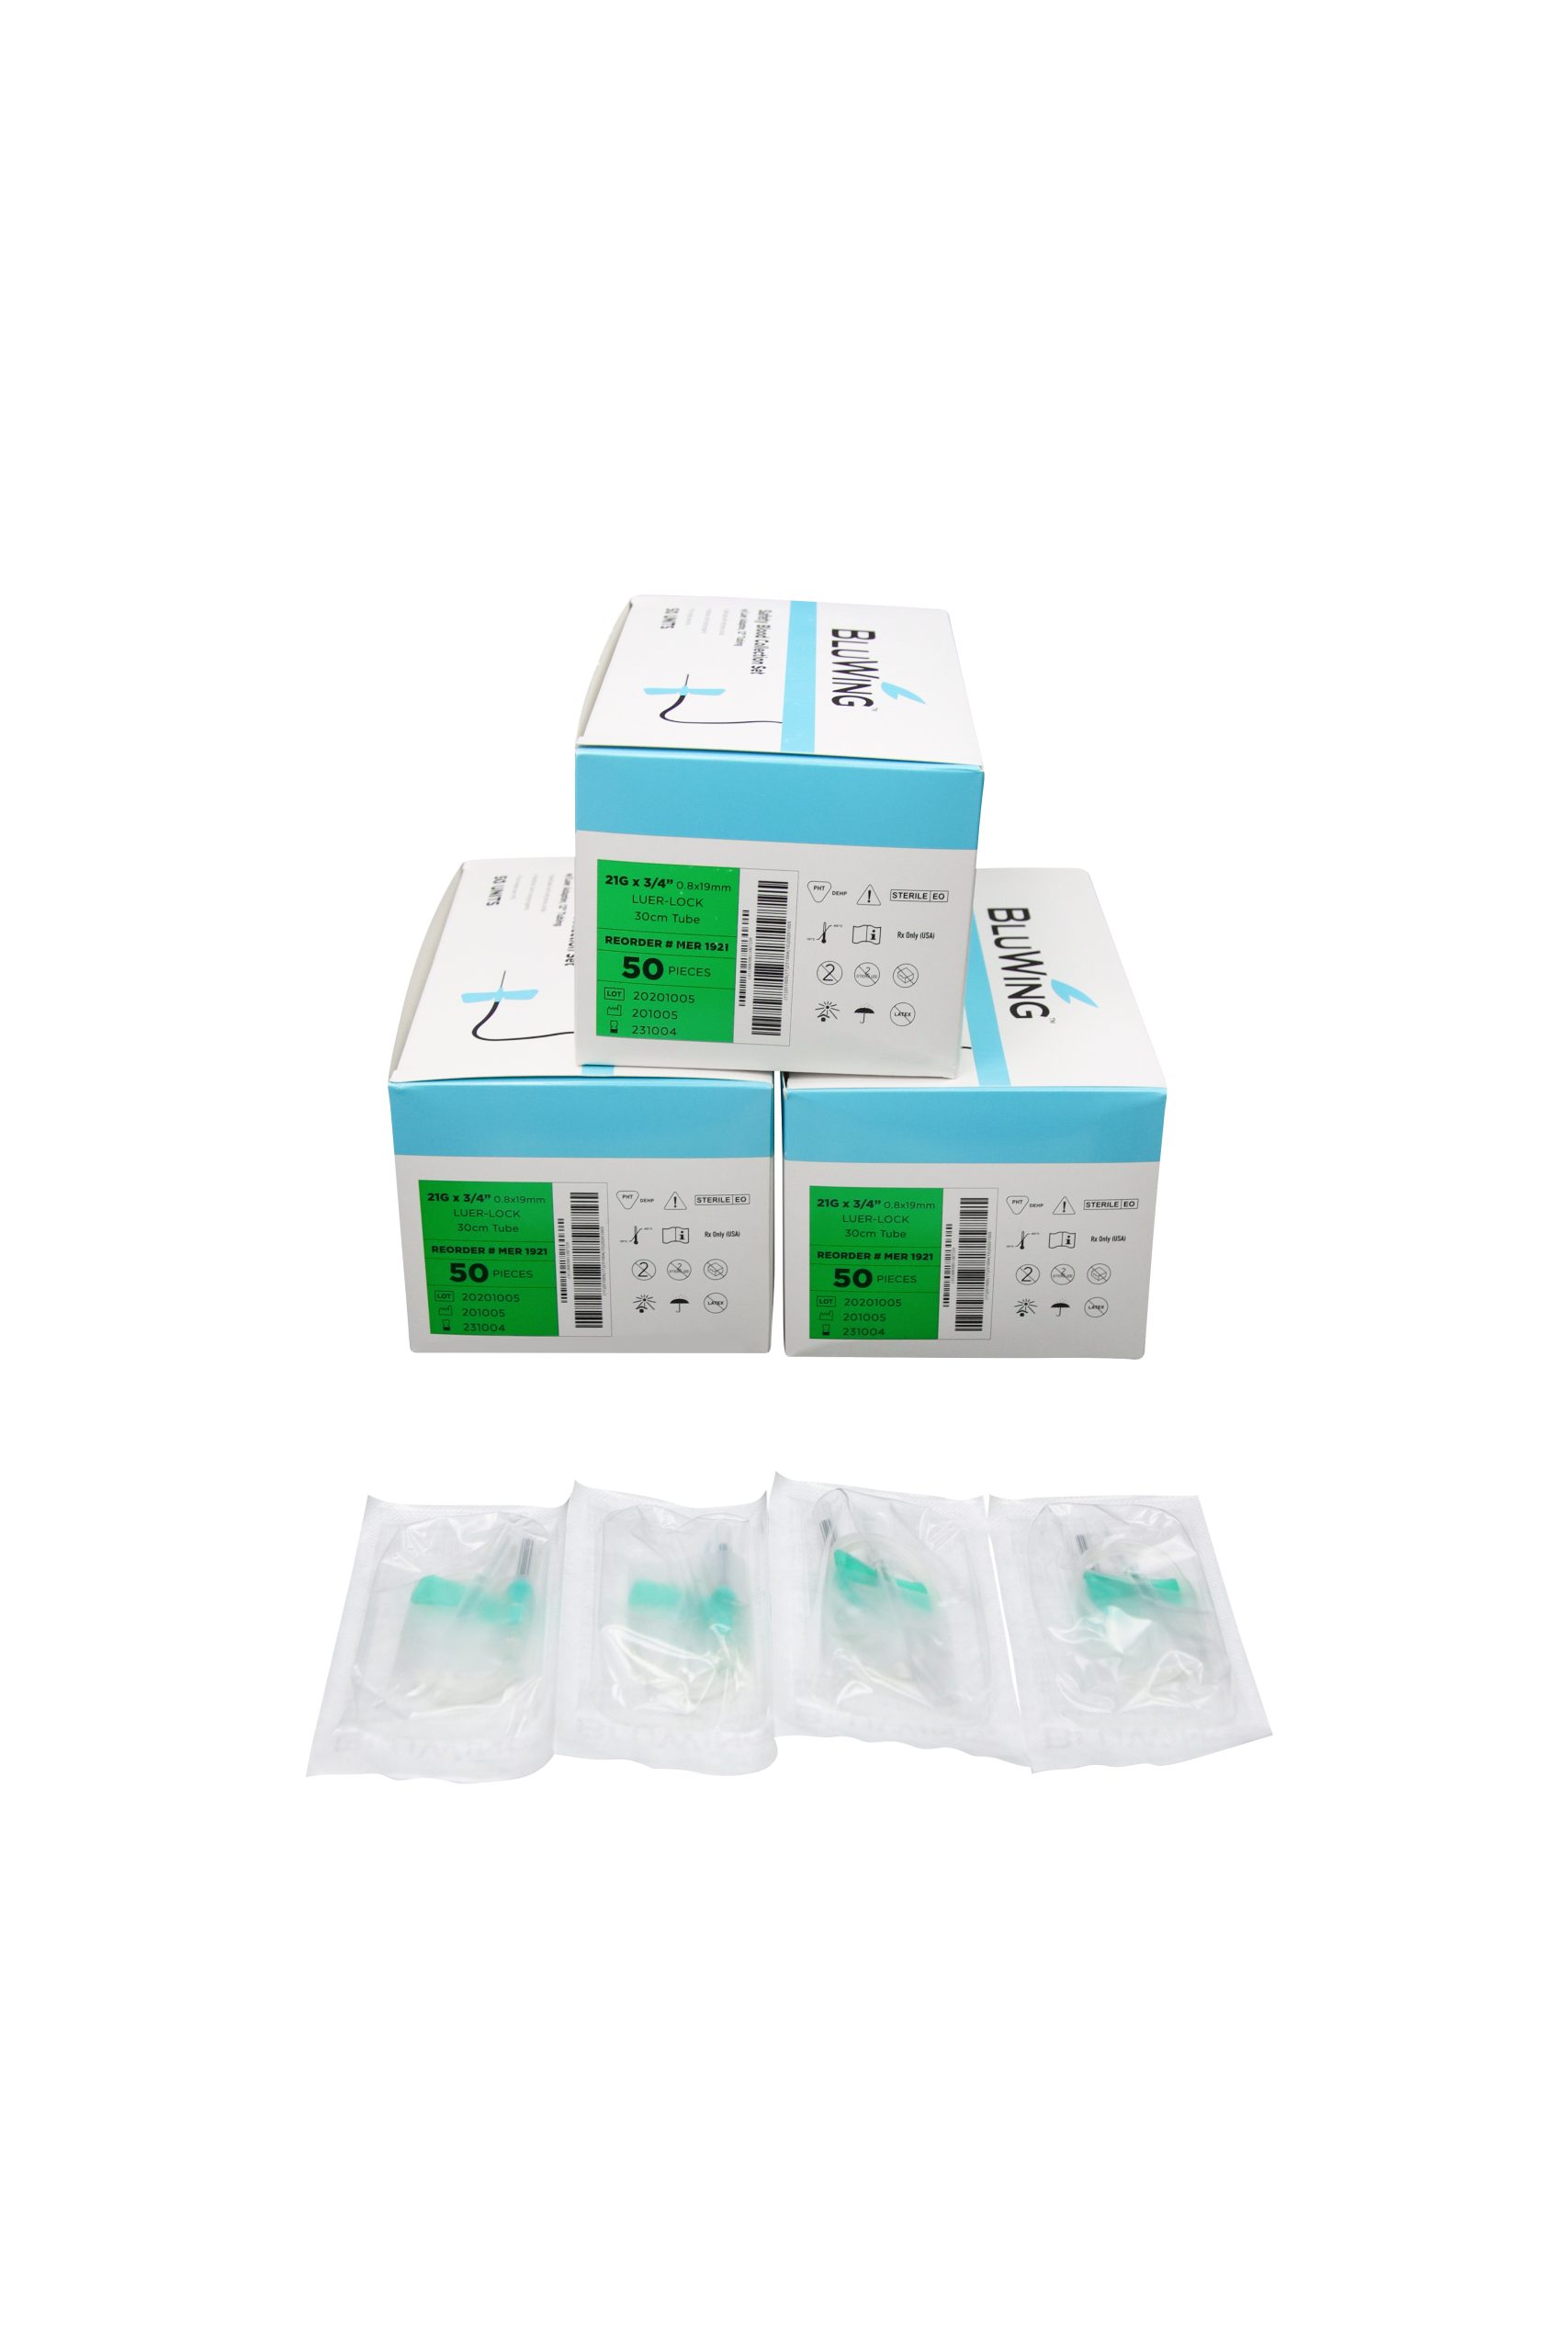 BD Vacutainer Butterfly Needle Set 21G x 3/4'' x 12'' 50/Box